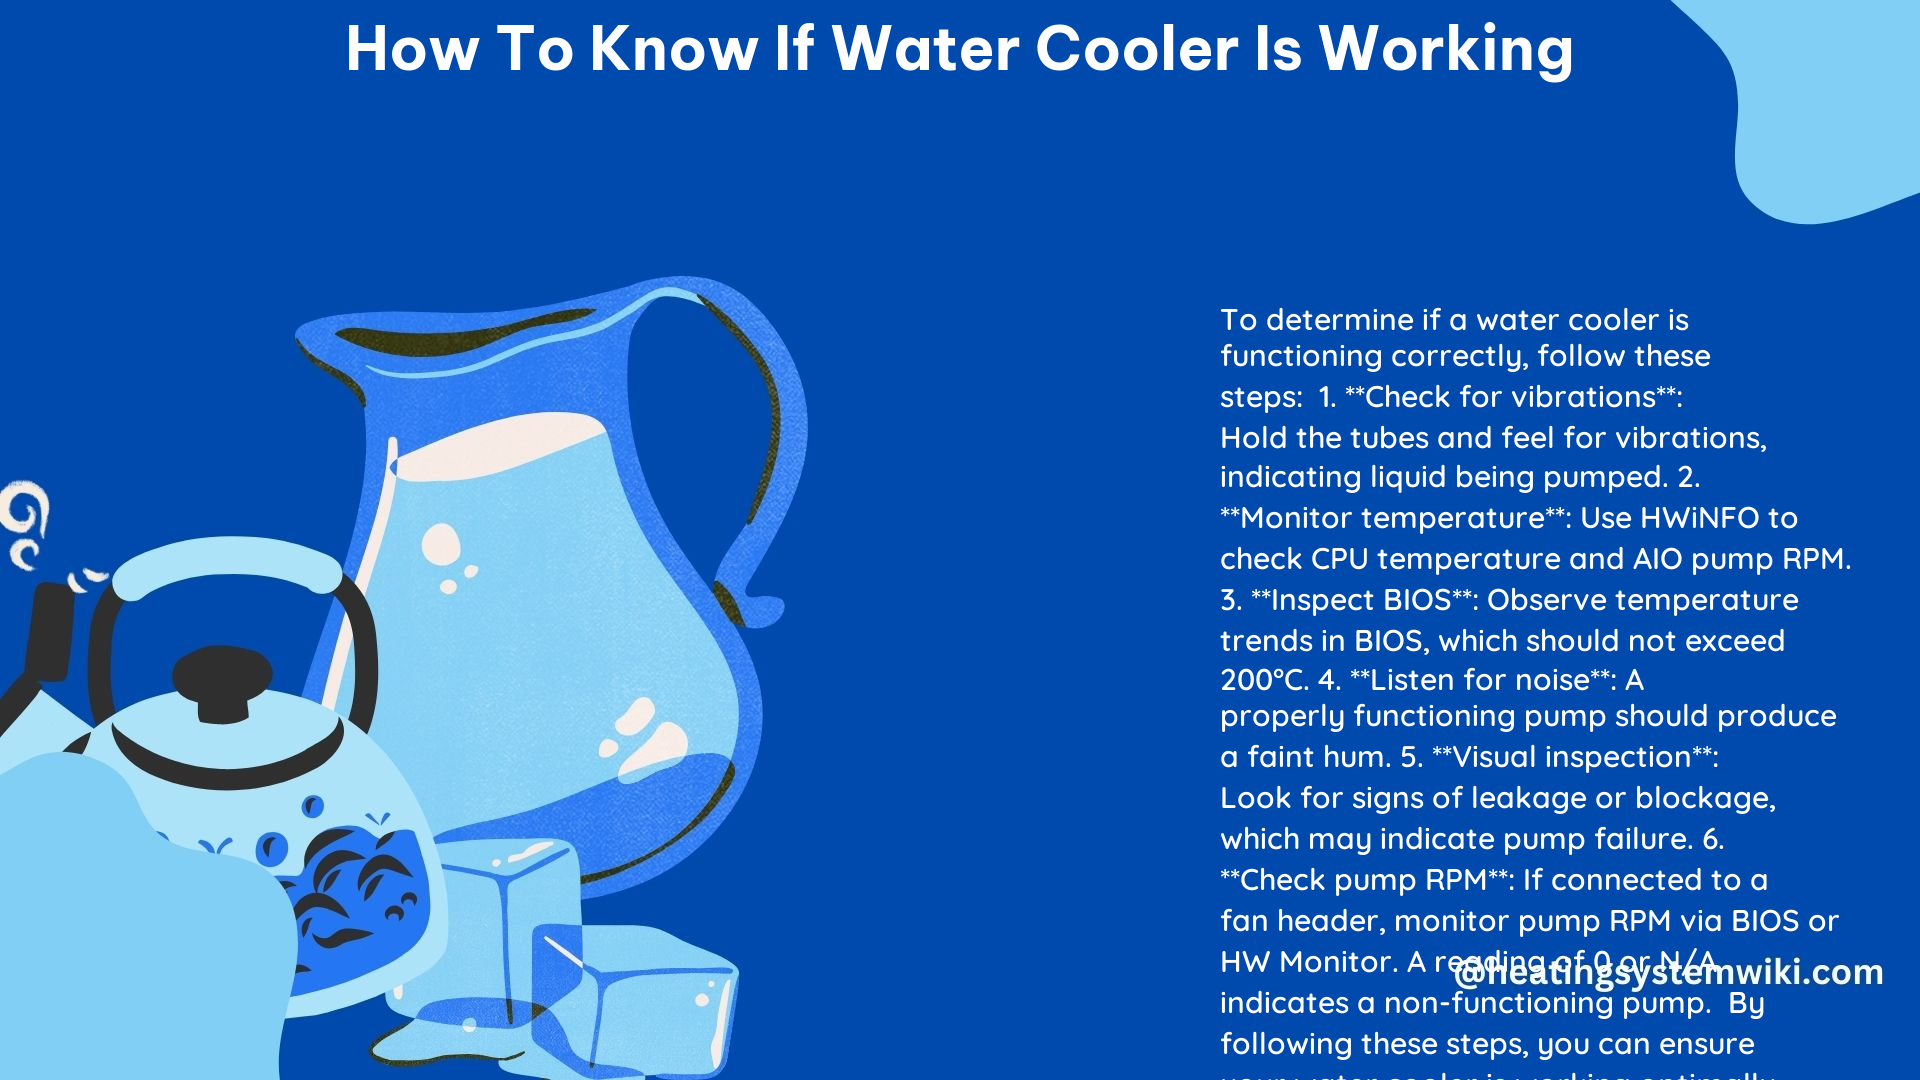 How to Know if Water Cooler Is Working